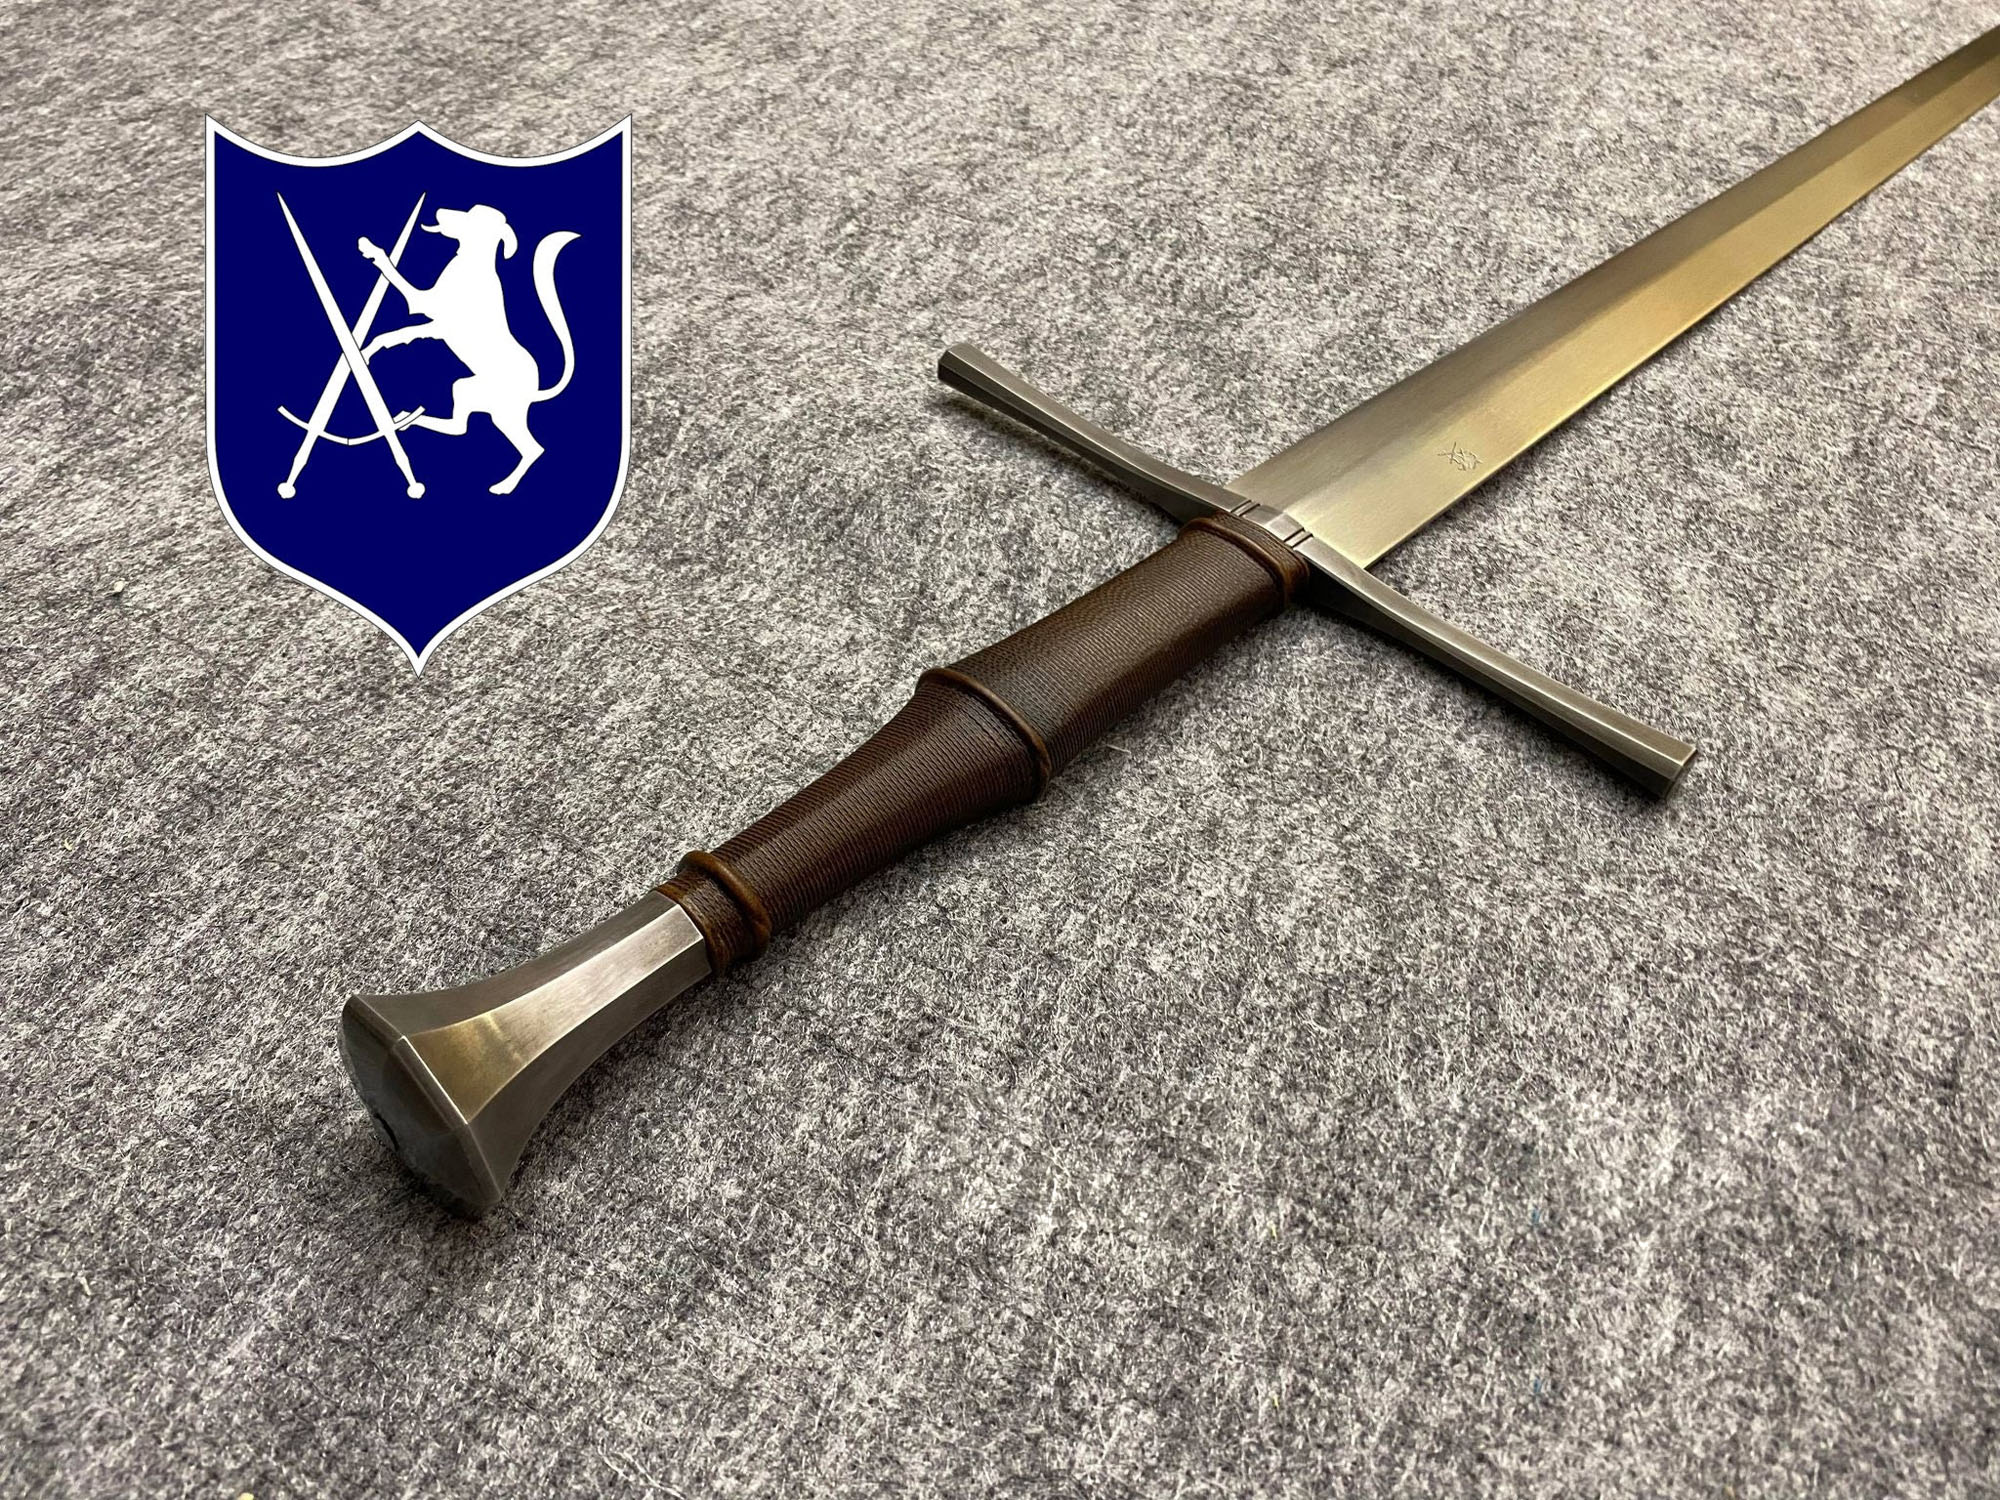 The Tauber Sword, Handforged and sharp blade